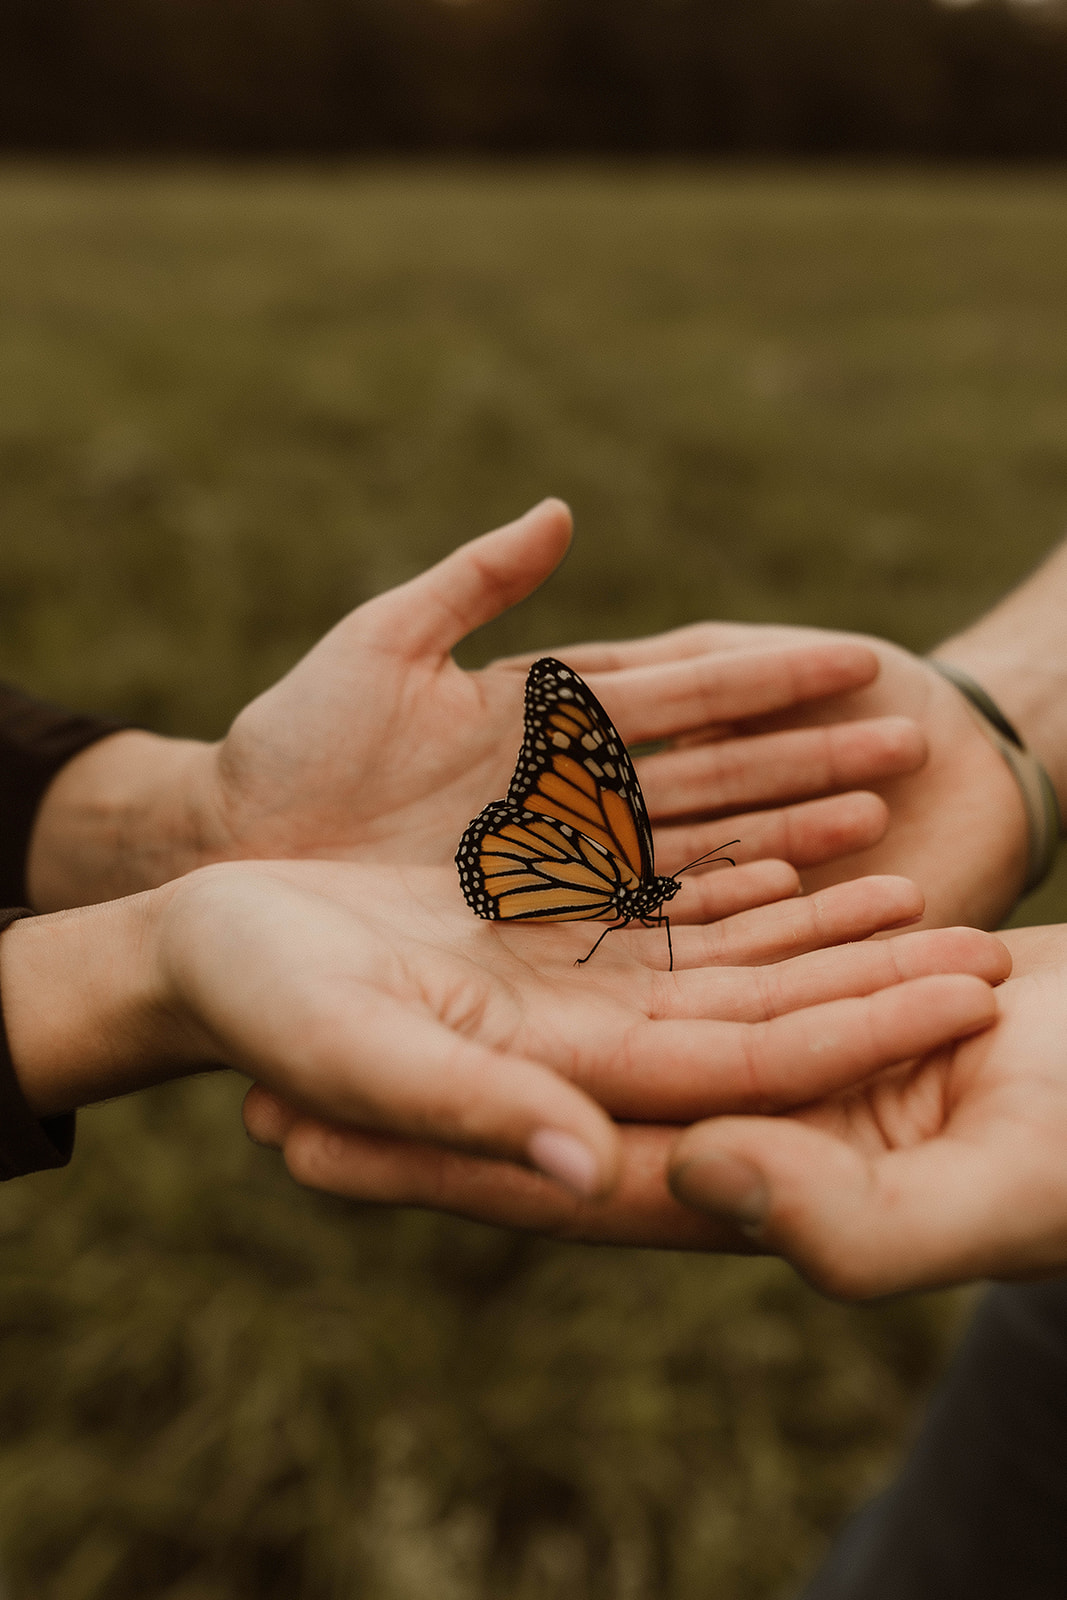 Stunning monarch butterfly lands on a couples hands during their dreamy upstate New York autumn engagement photoshoot